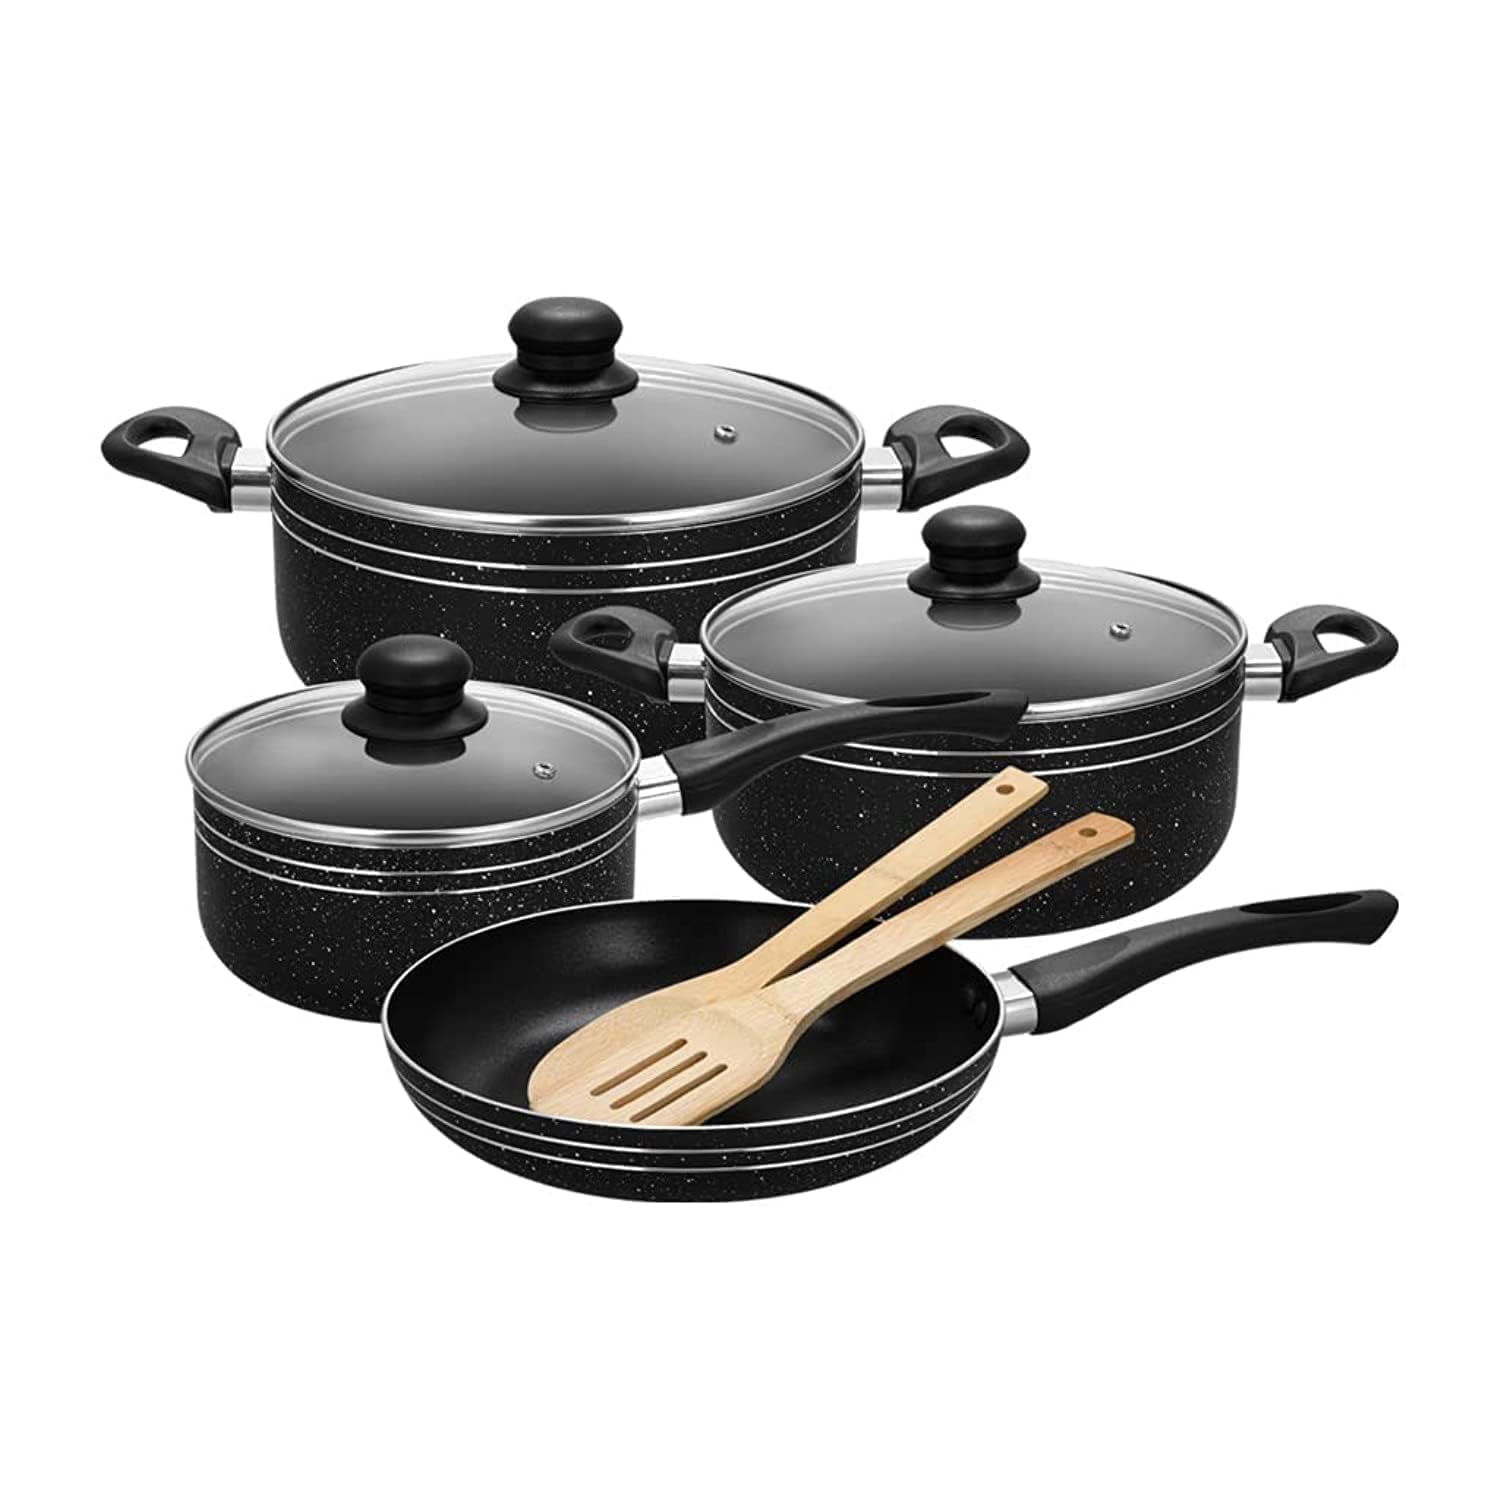 Royalford Ritz 9-Piece Non-Stick Cookware Set- RF11759 Aluminum Body With 3-Layer Construction, CD Bottom, Bakelite Handles And Glass Lid Black